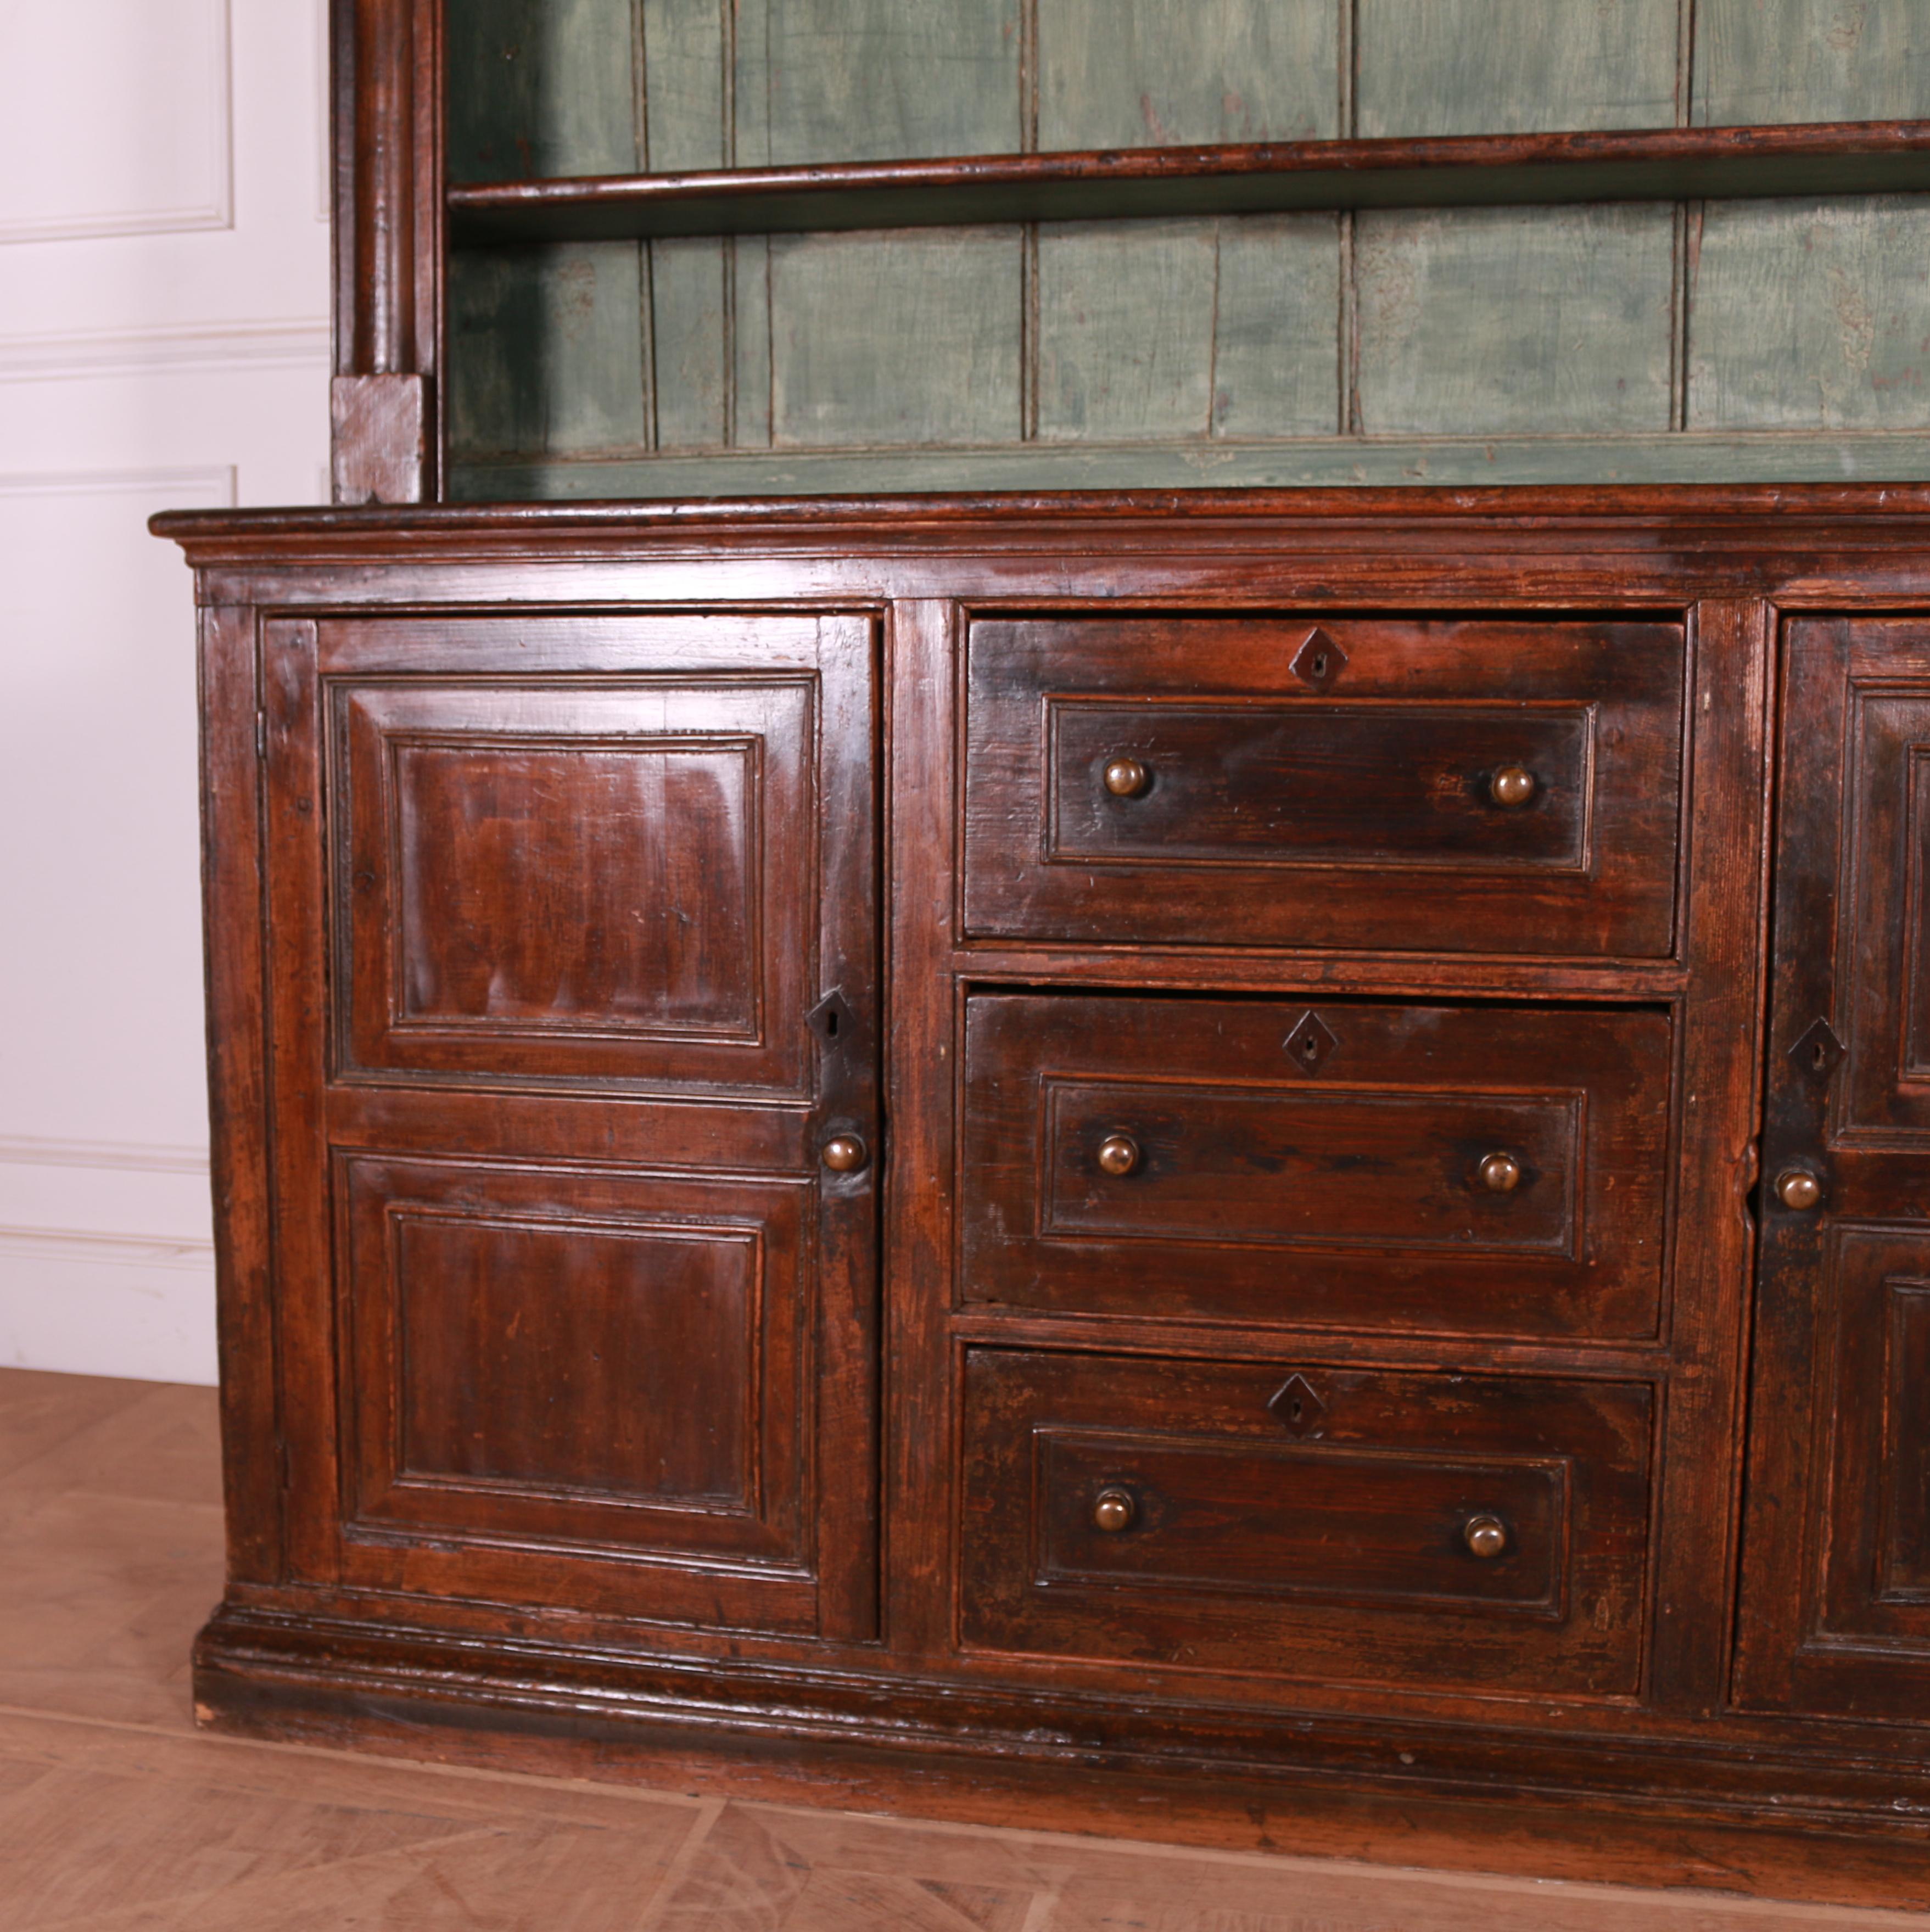 Good early 19th Century west country original painted pine dresser. Wax scumble finish with lovely wear. 1820.

Reference: 7729

Dimensions
72.5 inches (184 cms) wide.
18 inches (46 cms) deep.
79 inches (201 cms) high.